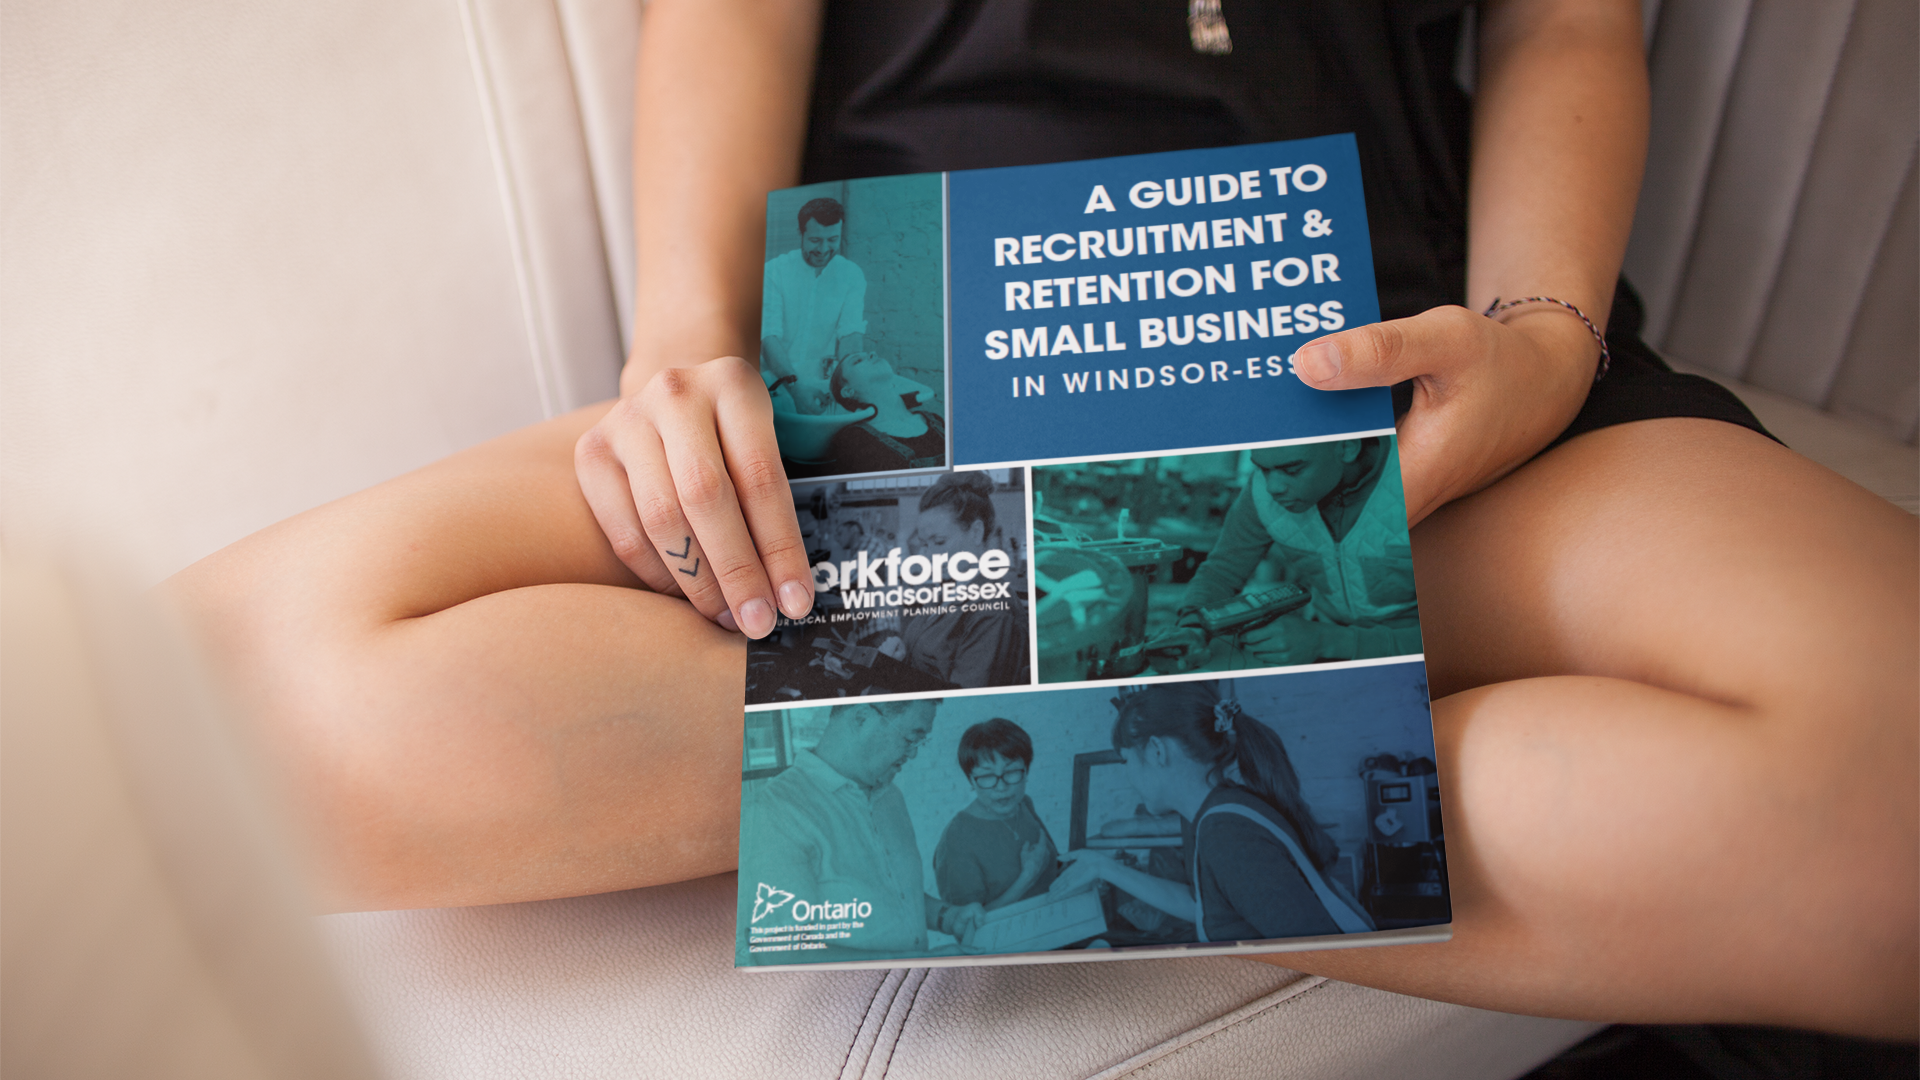 Person holding A Guide to Recruitment and Retention for Small Business in Windsor-Essex